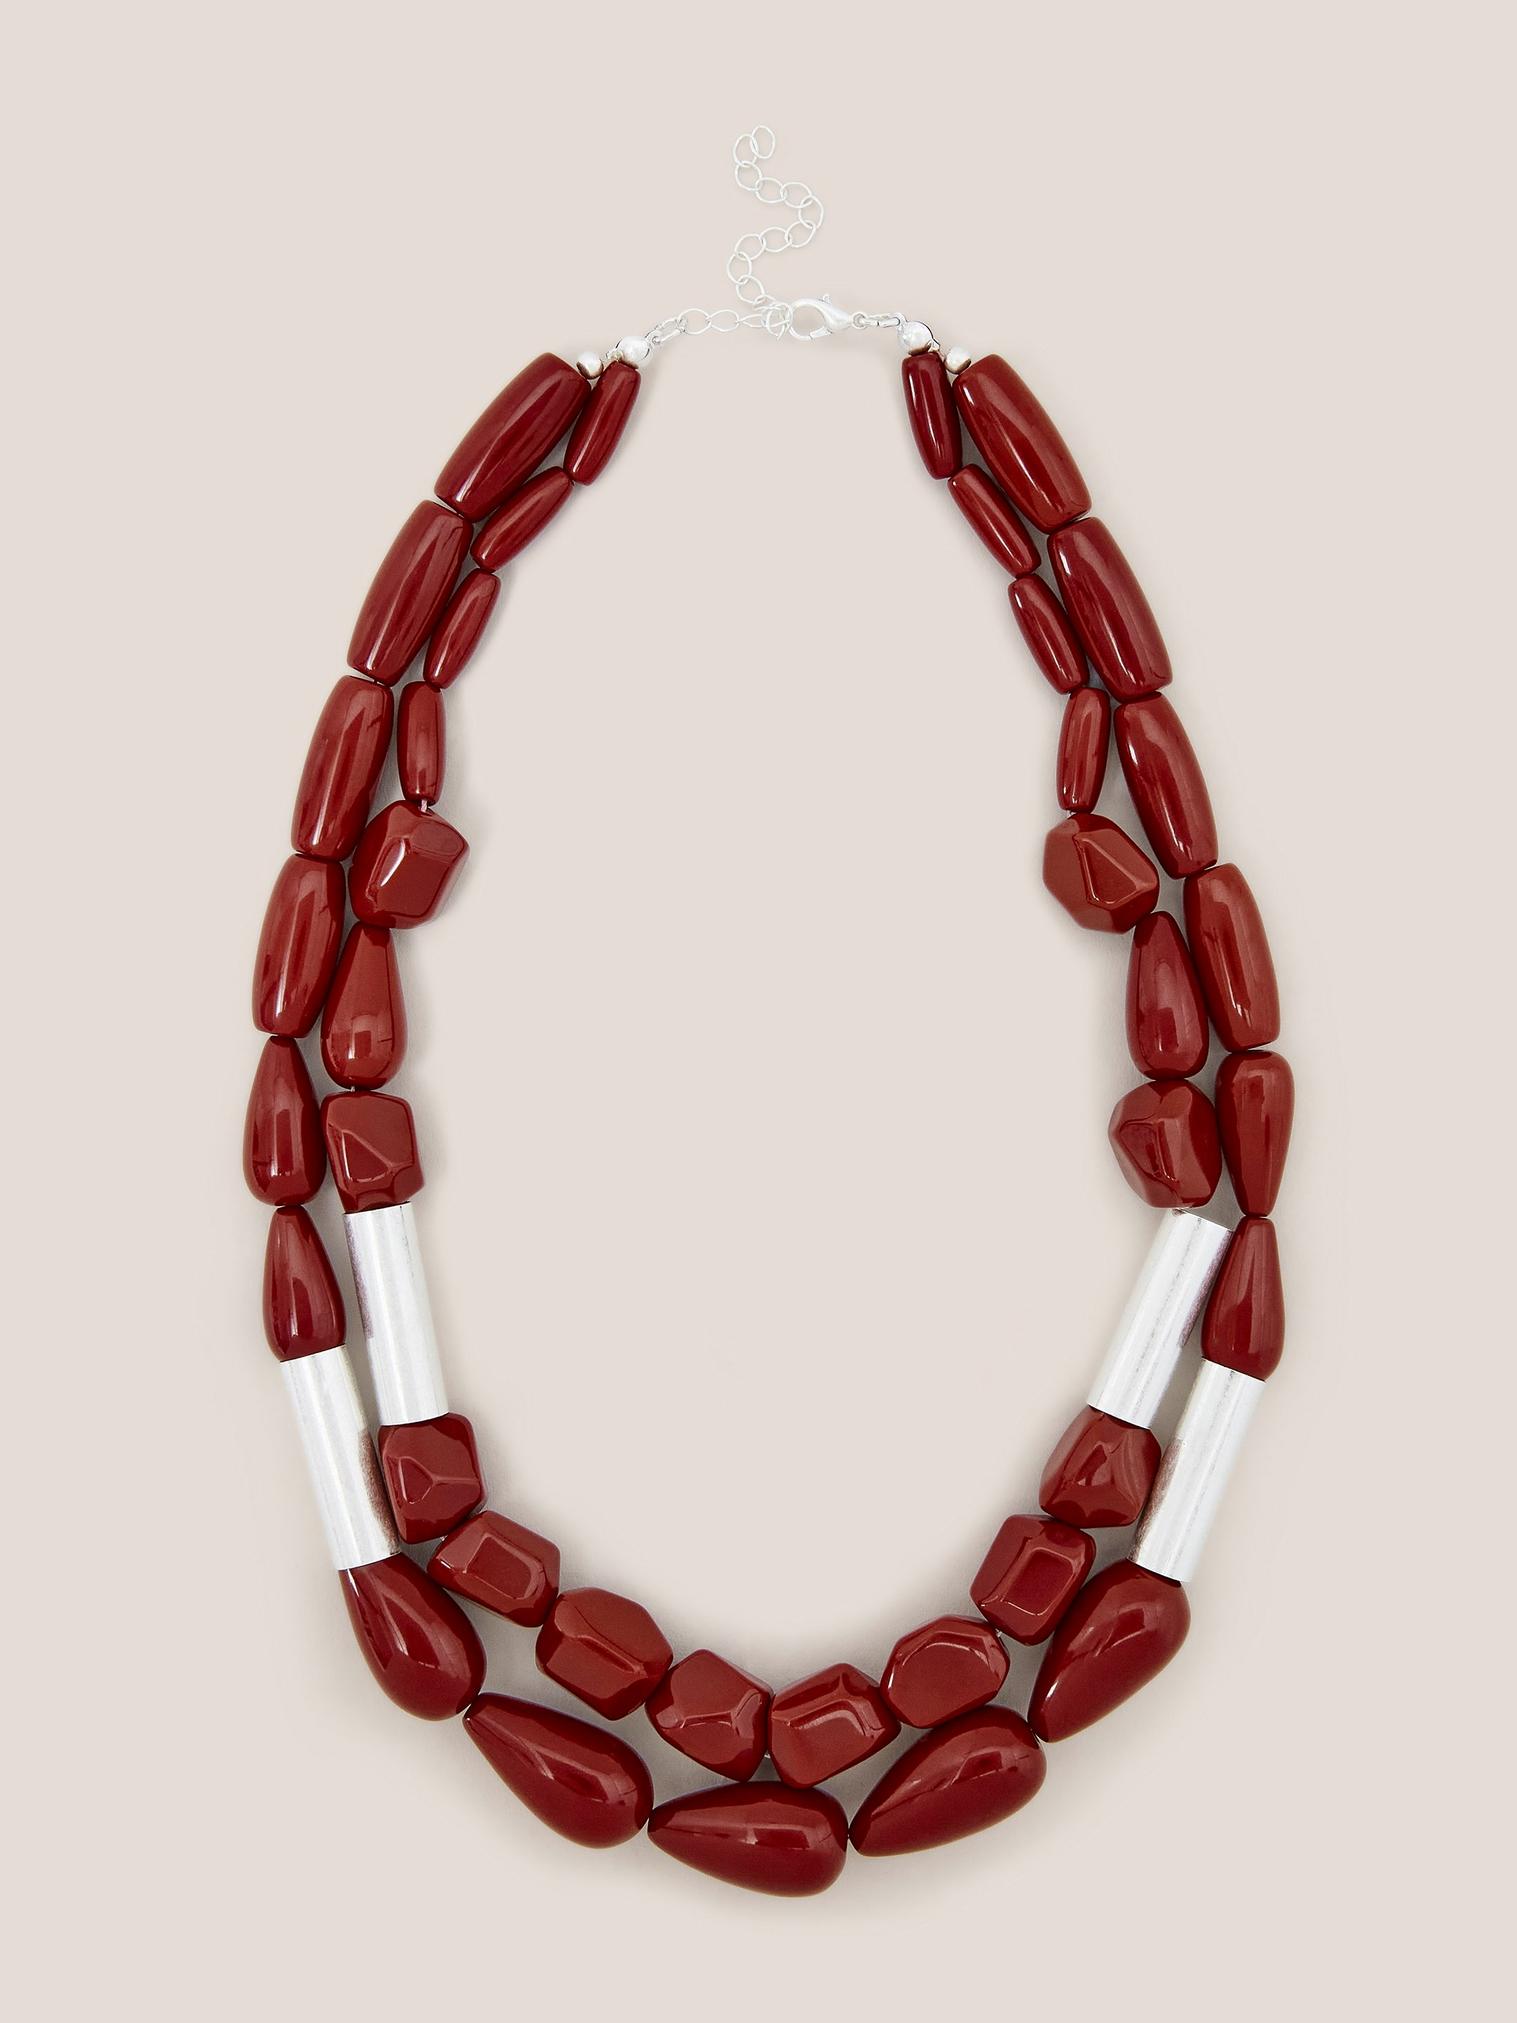 Jasmine Bead Necklace in DEEP RED - FLAT FRONT